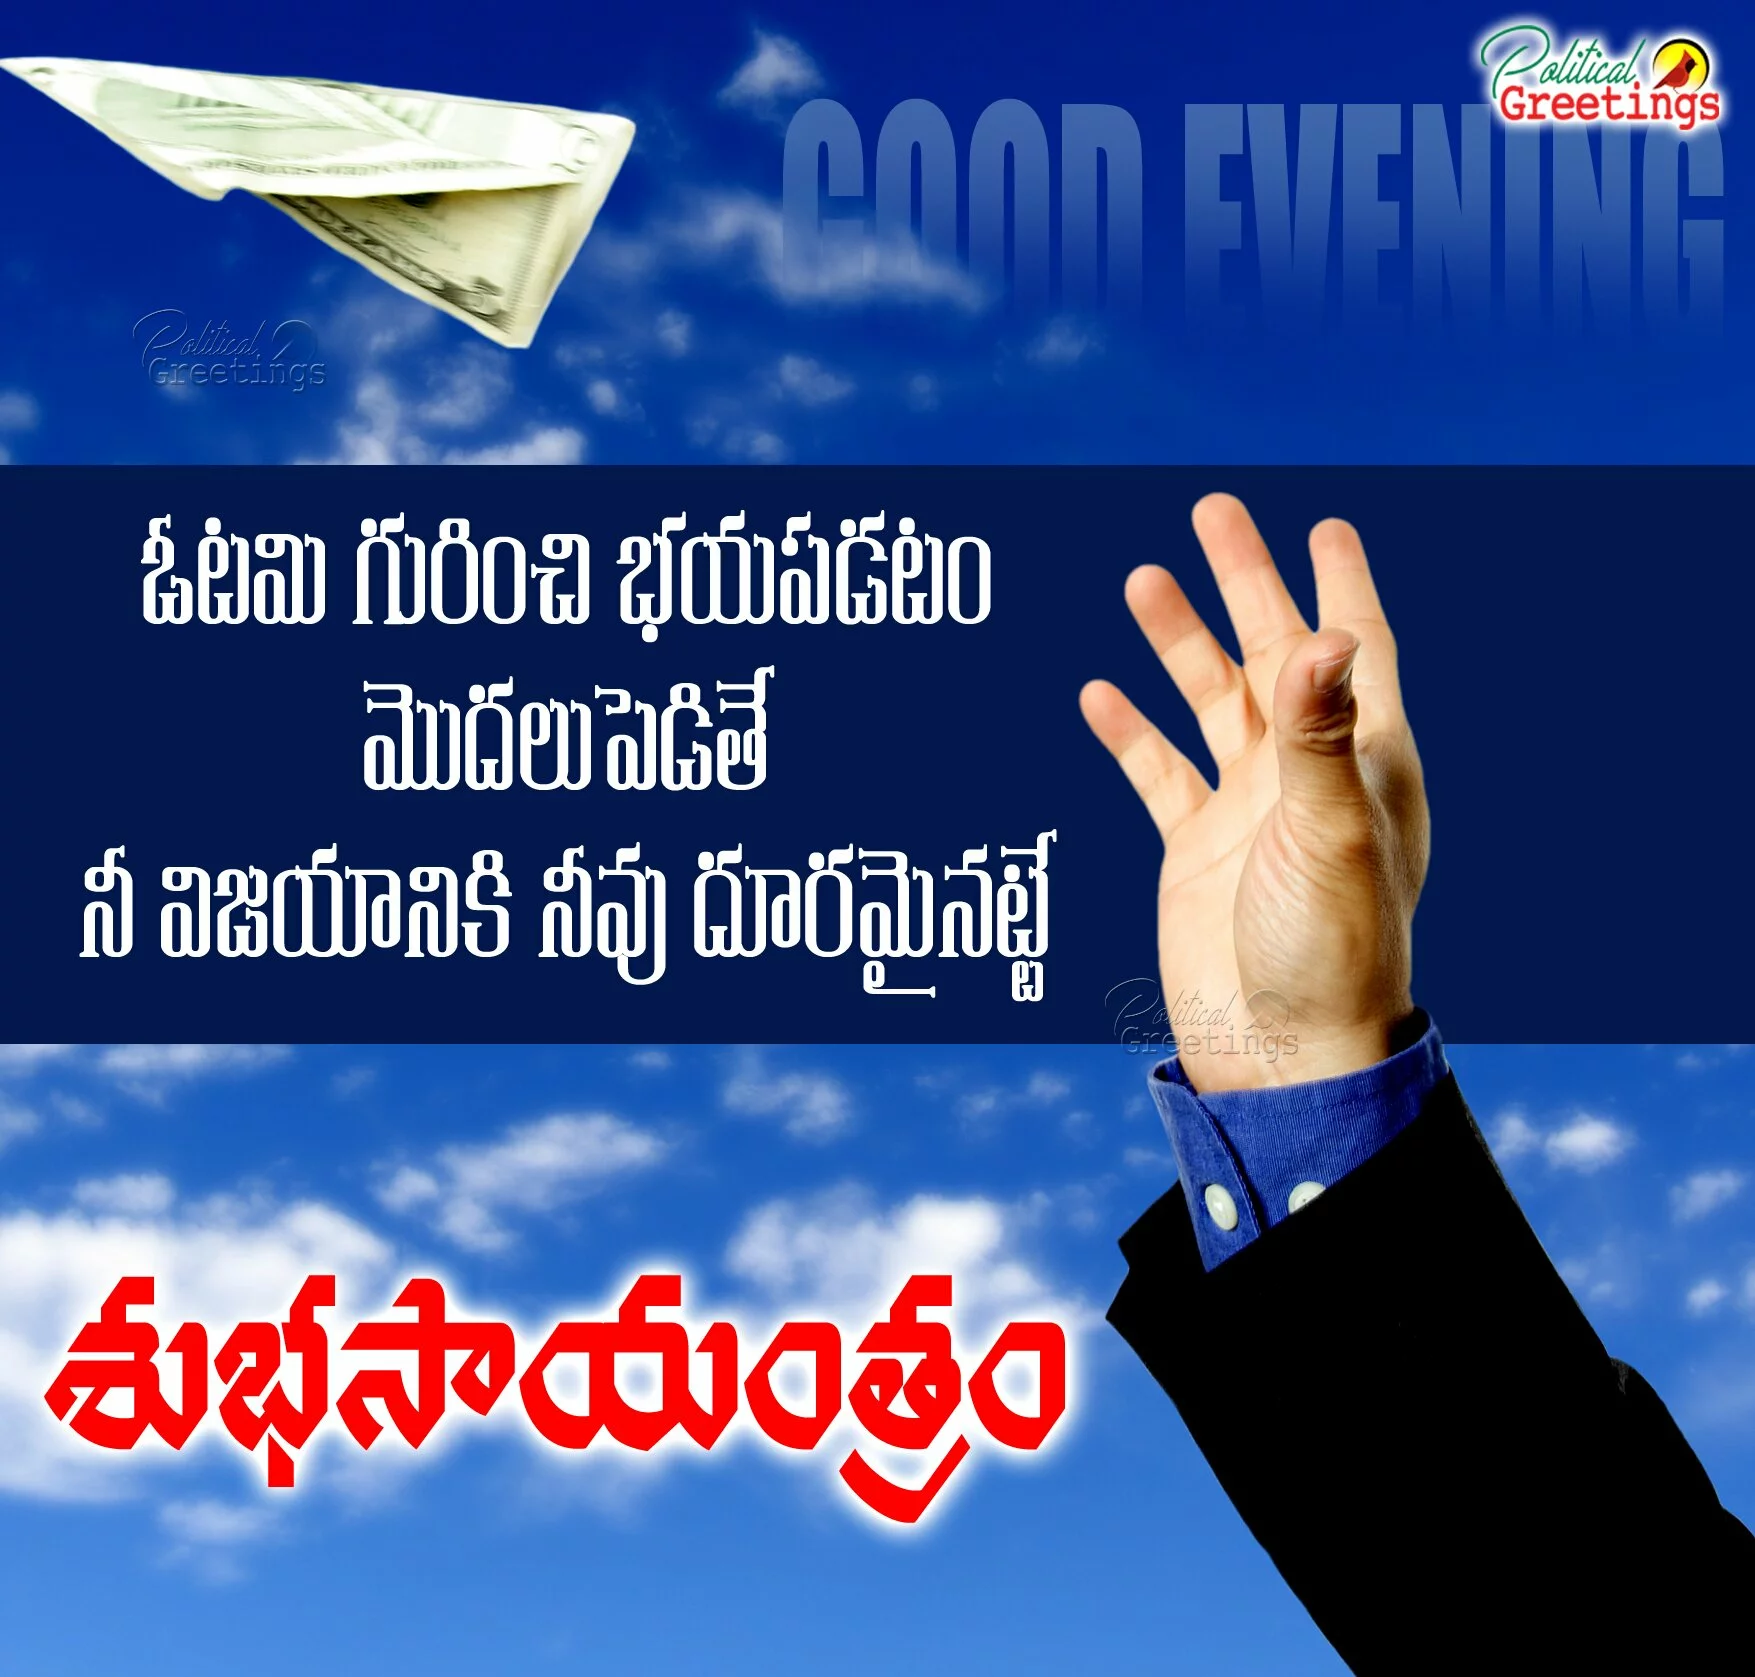 Good evening Wishes quotes in telugu Telugu Quotations Best Sayings about Life Success in Telugu-Telugu Subhasayantram Good Evening Quotes Greetings